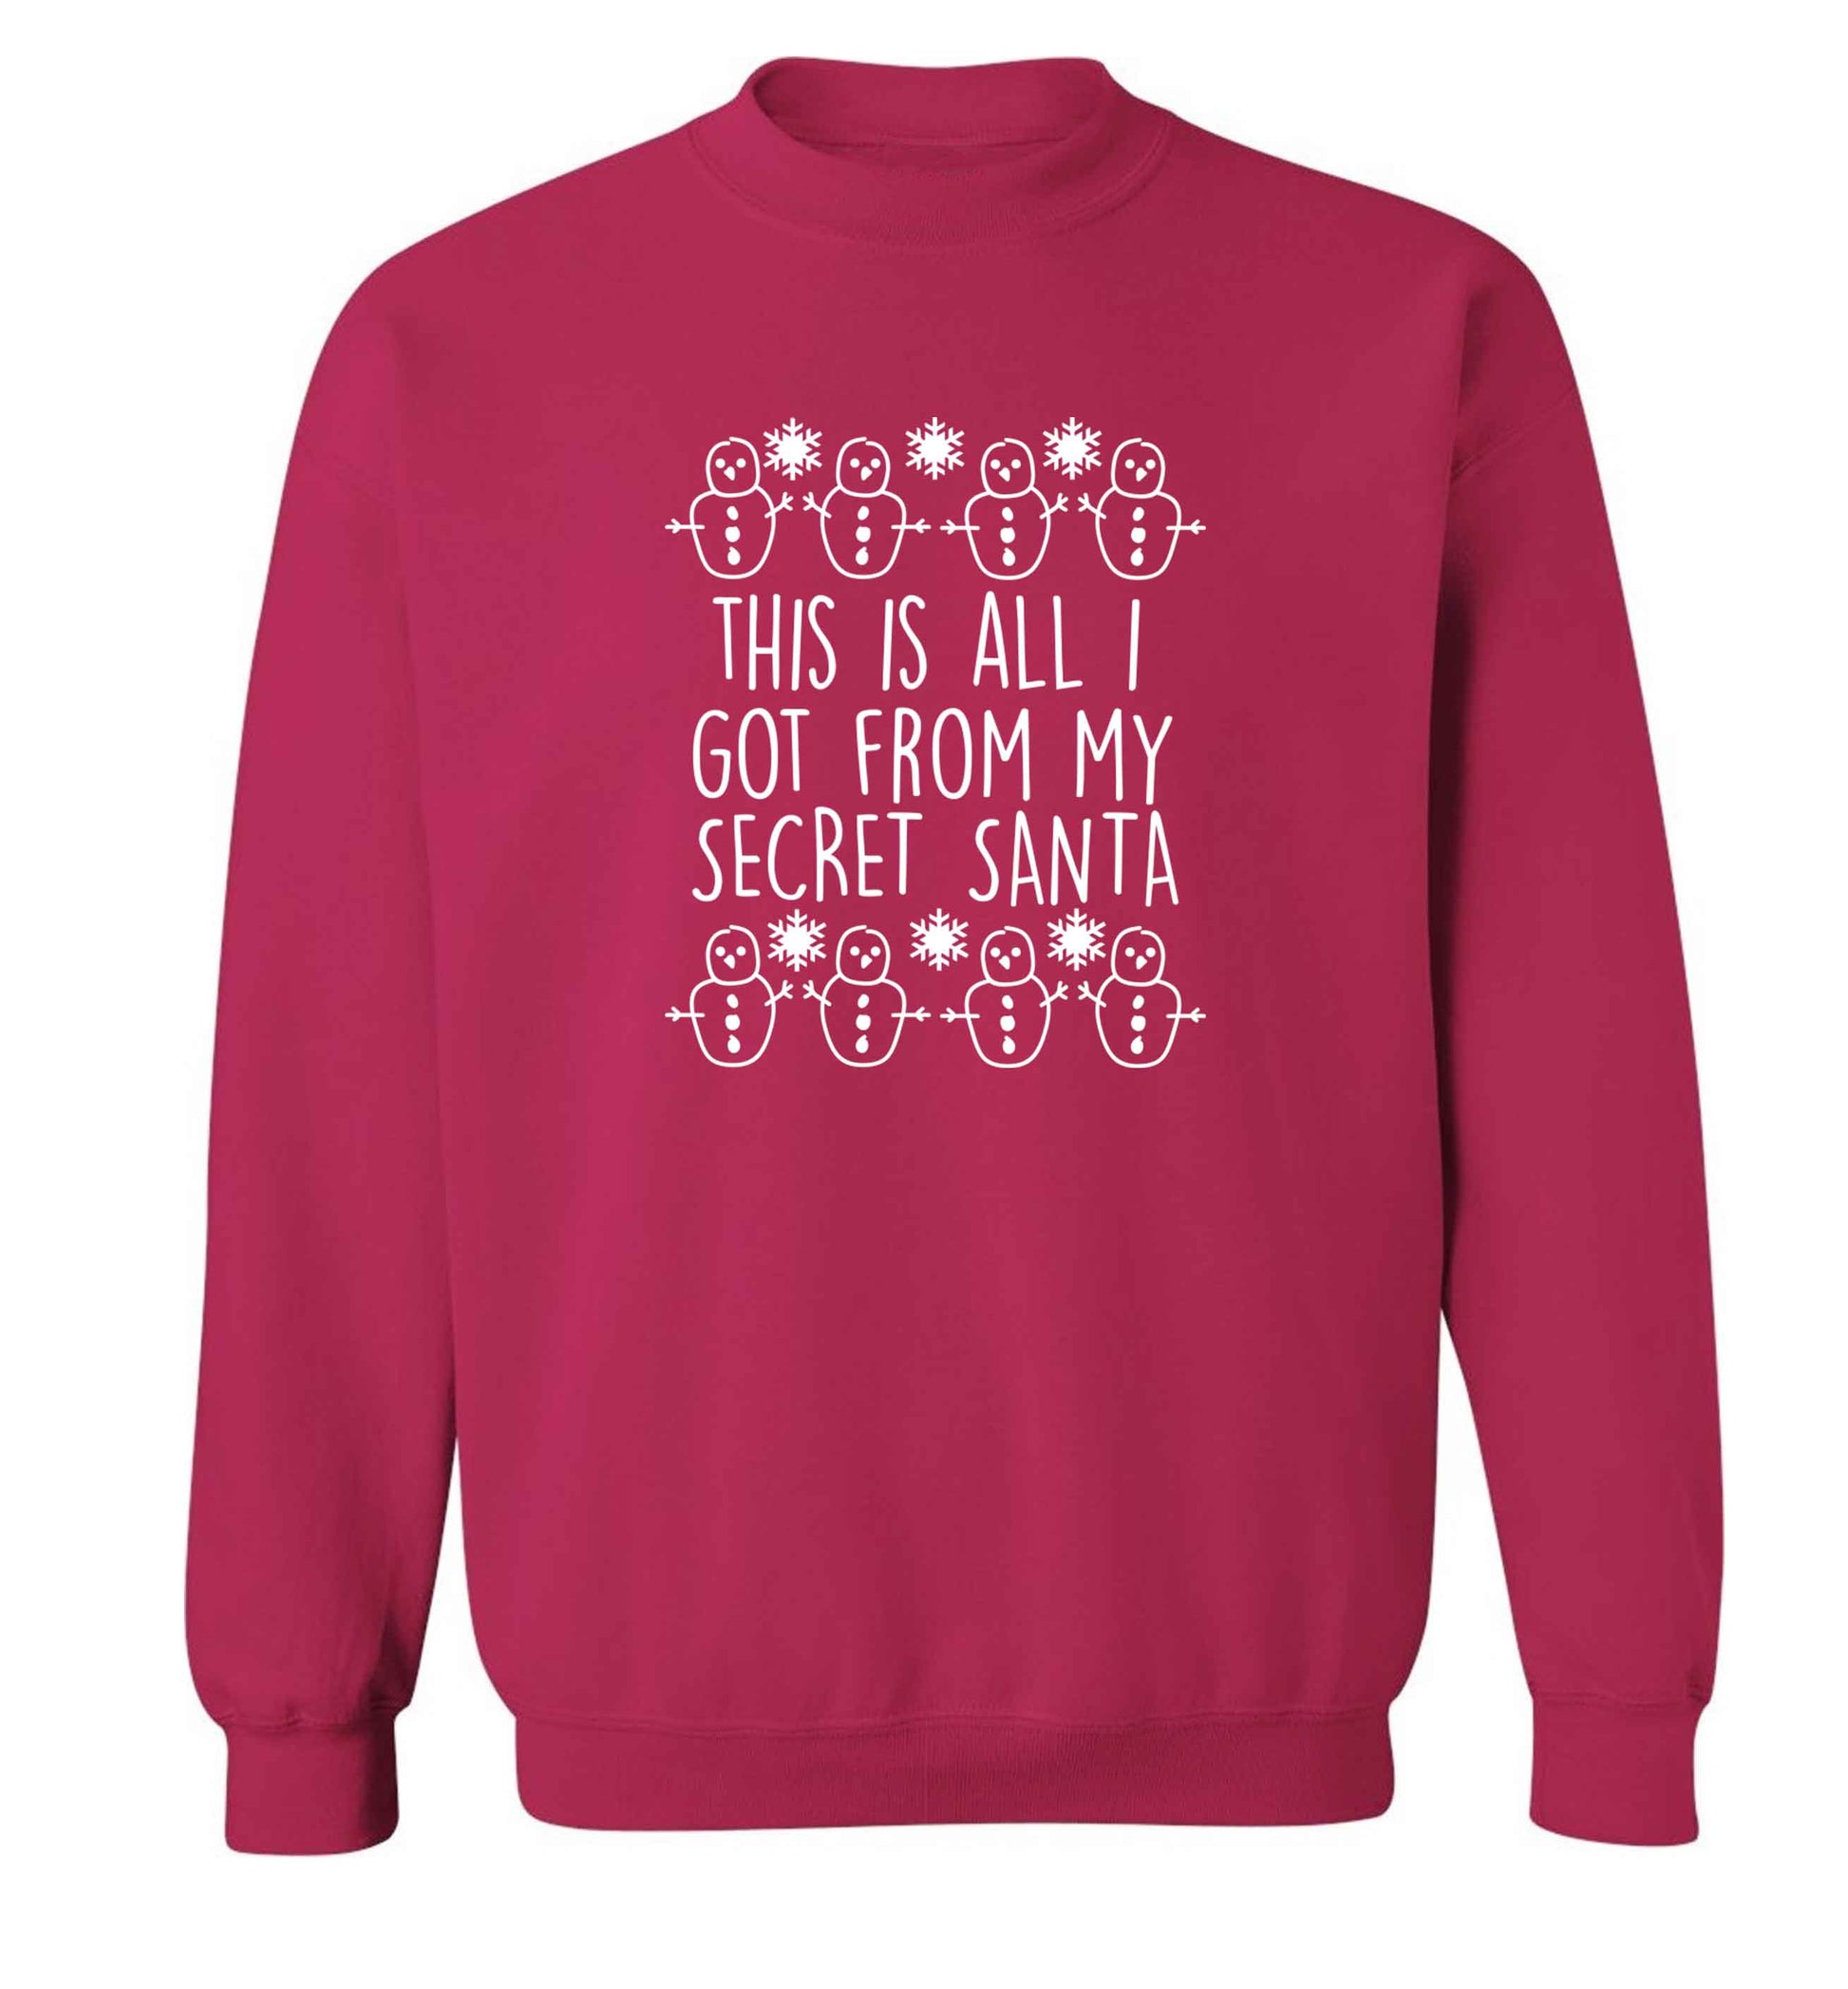 This is all I got from my secret Santa adult's unisex pink sweater 2XL